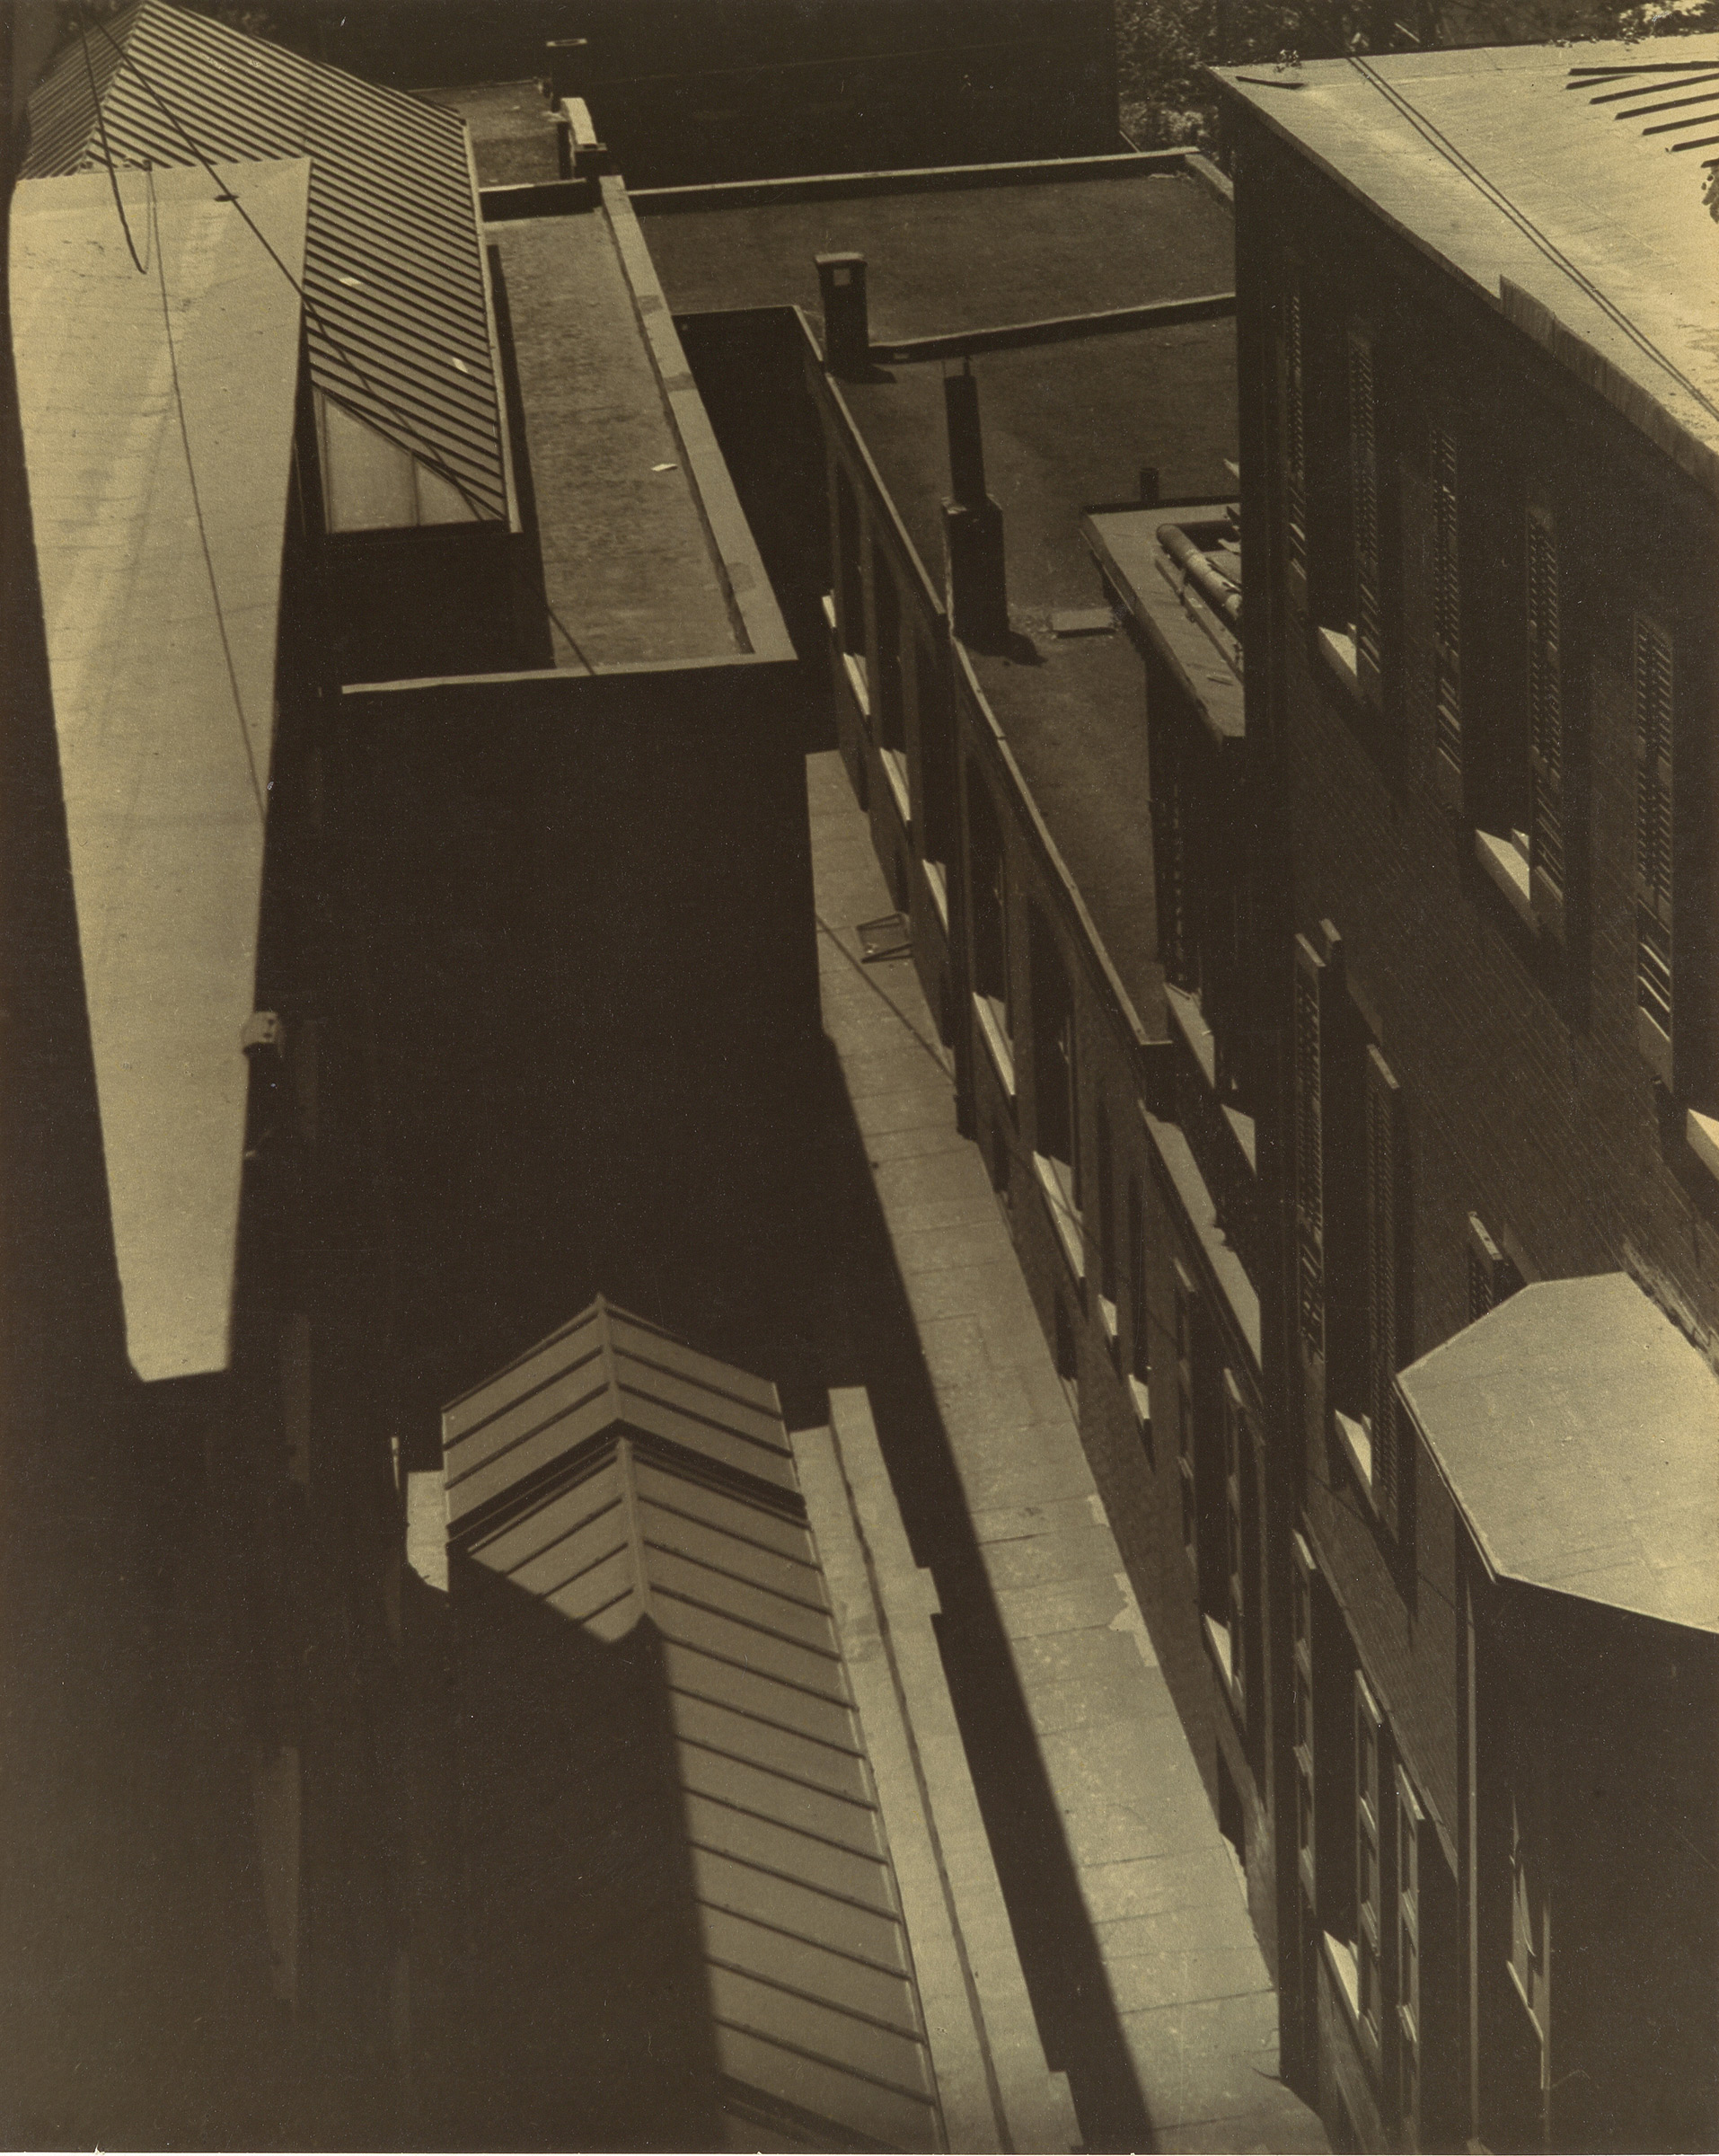 Morton Schamberg's "[View of Rooftops]," 1917 (John C. Waddell/Ford Motor Company Collection/The Metropolitan Museum of Art)